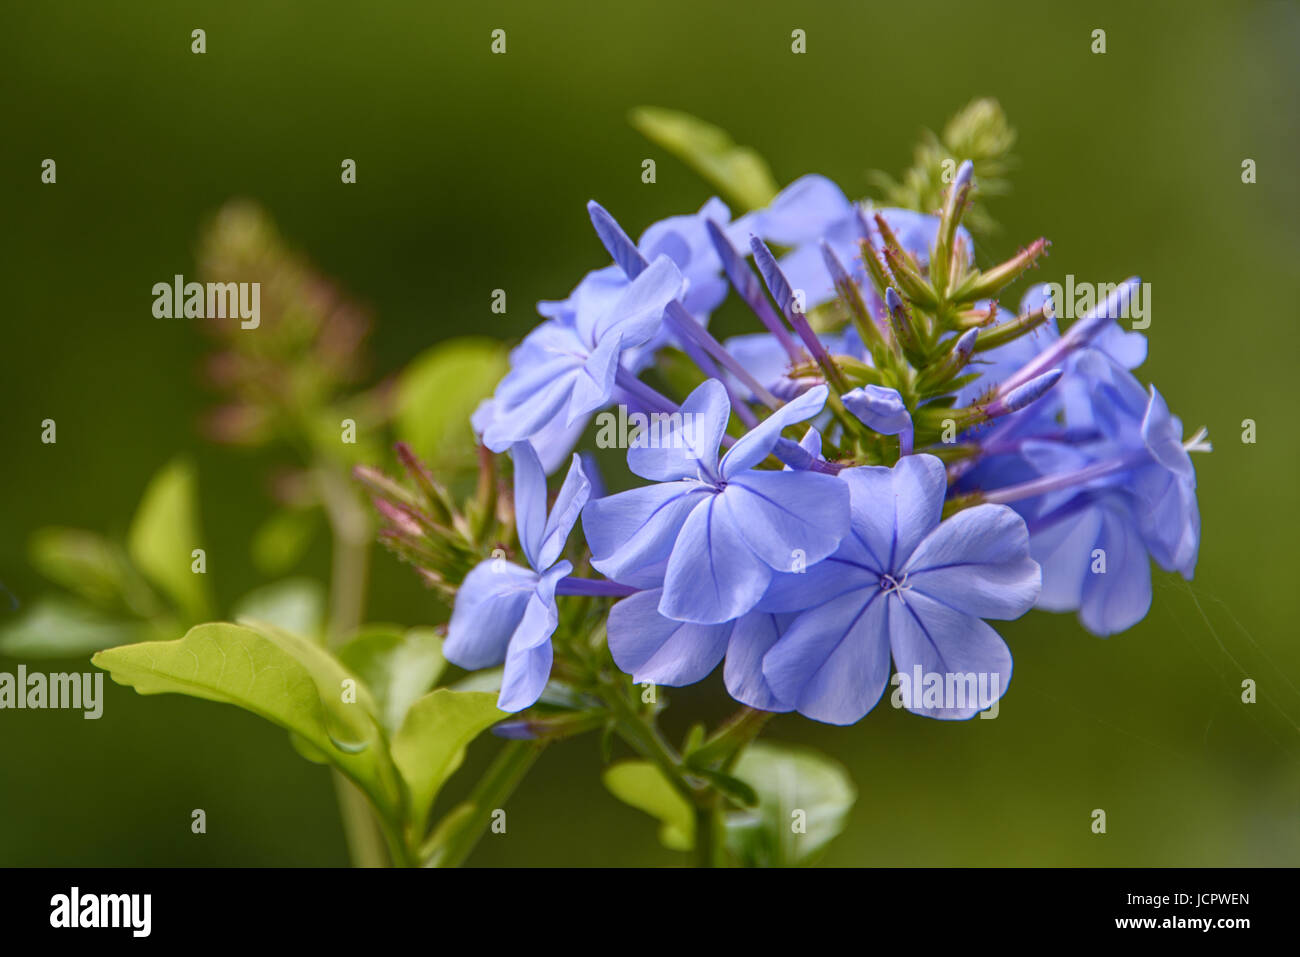 Flowering plant with a blue petals, close up, evergreen shrub Stock Photo